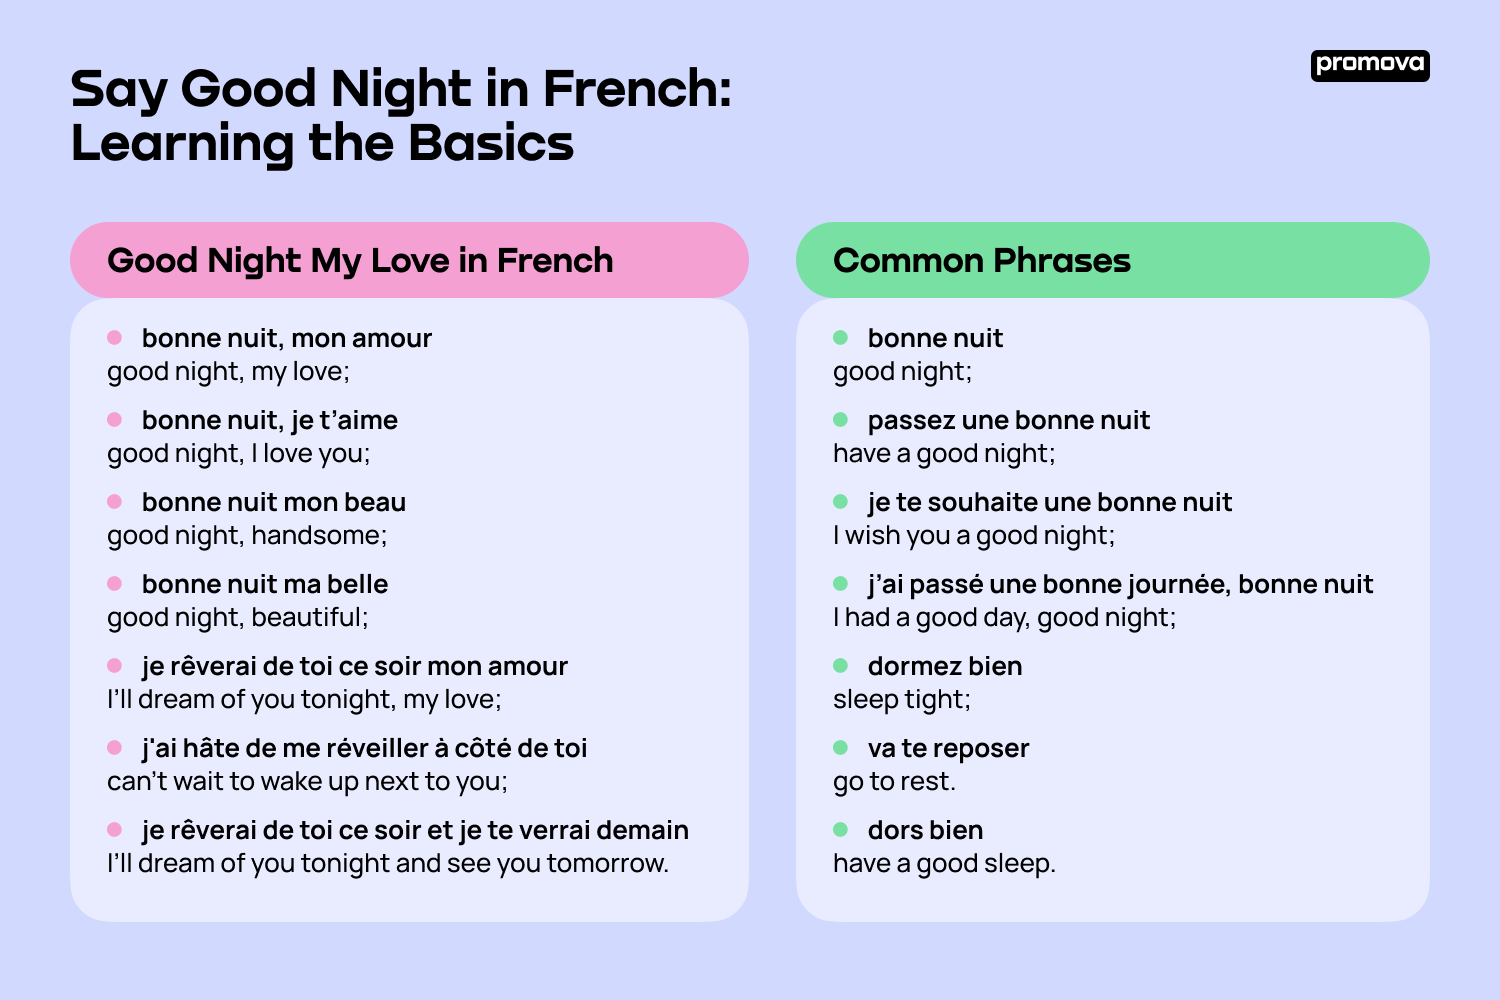 Explore Typical French Good Night Expressions